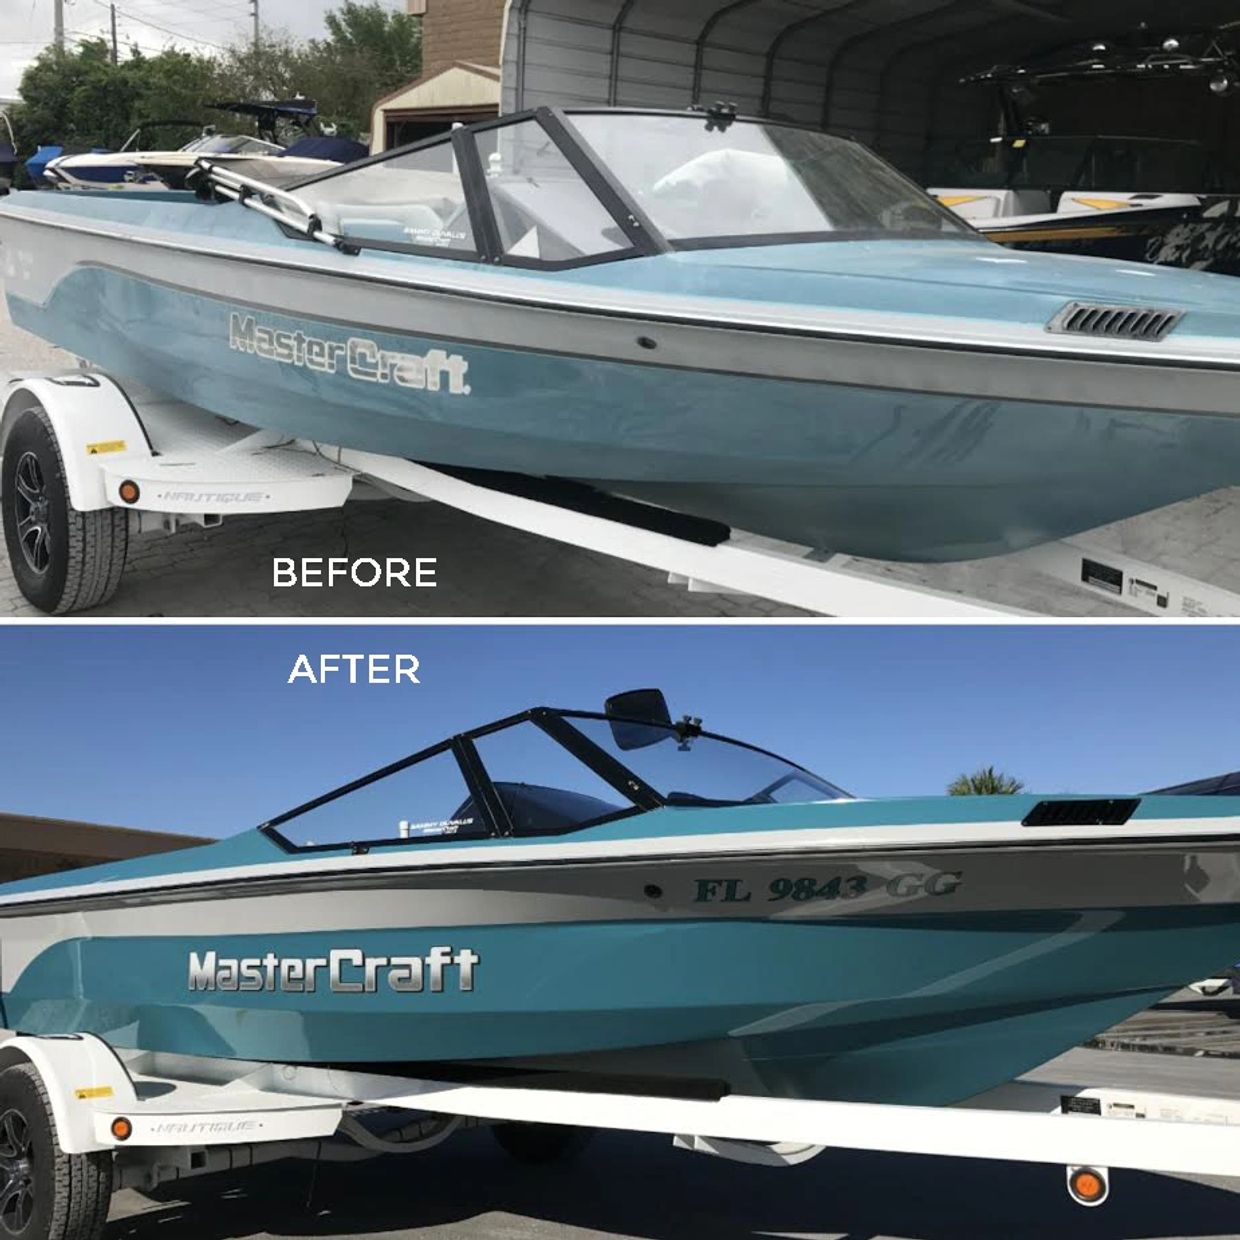 Selecting the Best Waxes and Ceramic Coatings for Your Boat, Part